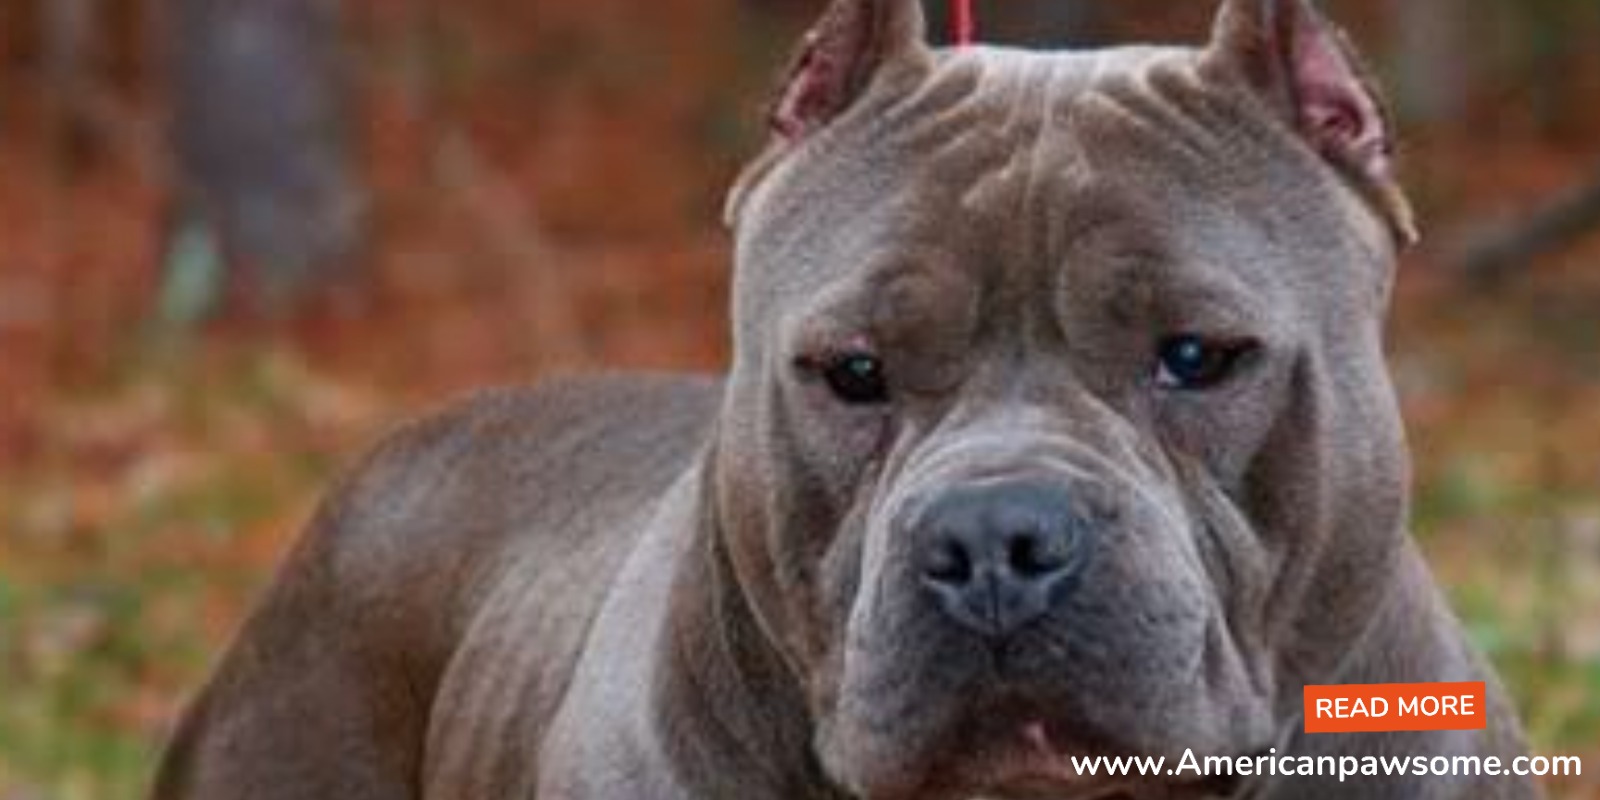 When Does American Bully Head Growth Occur